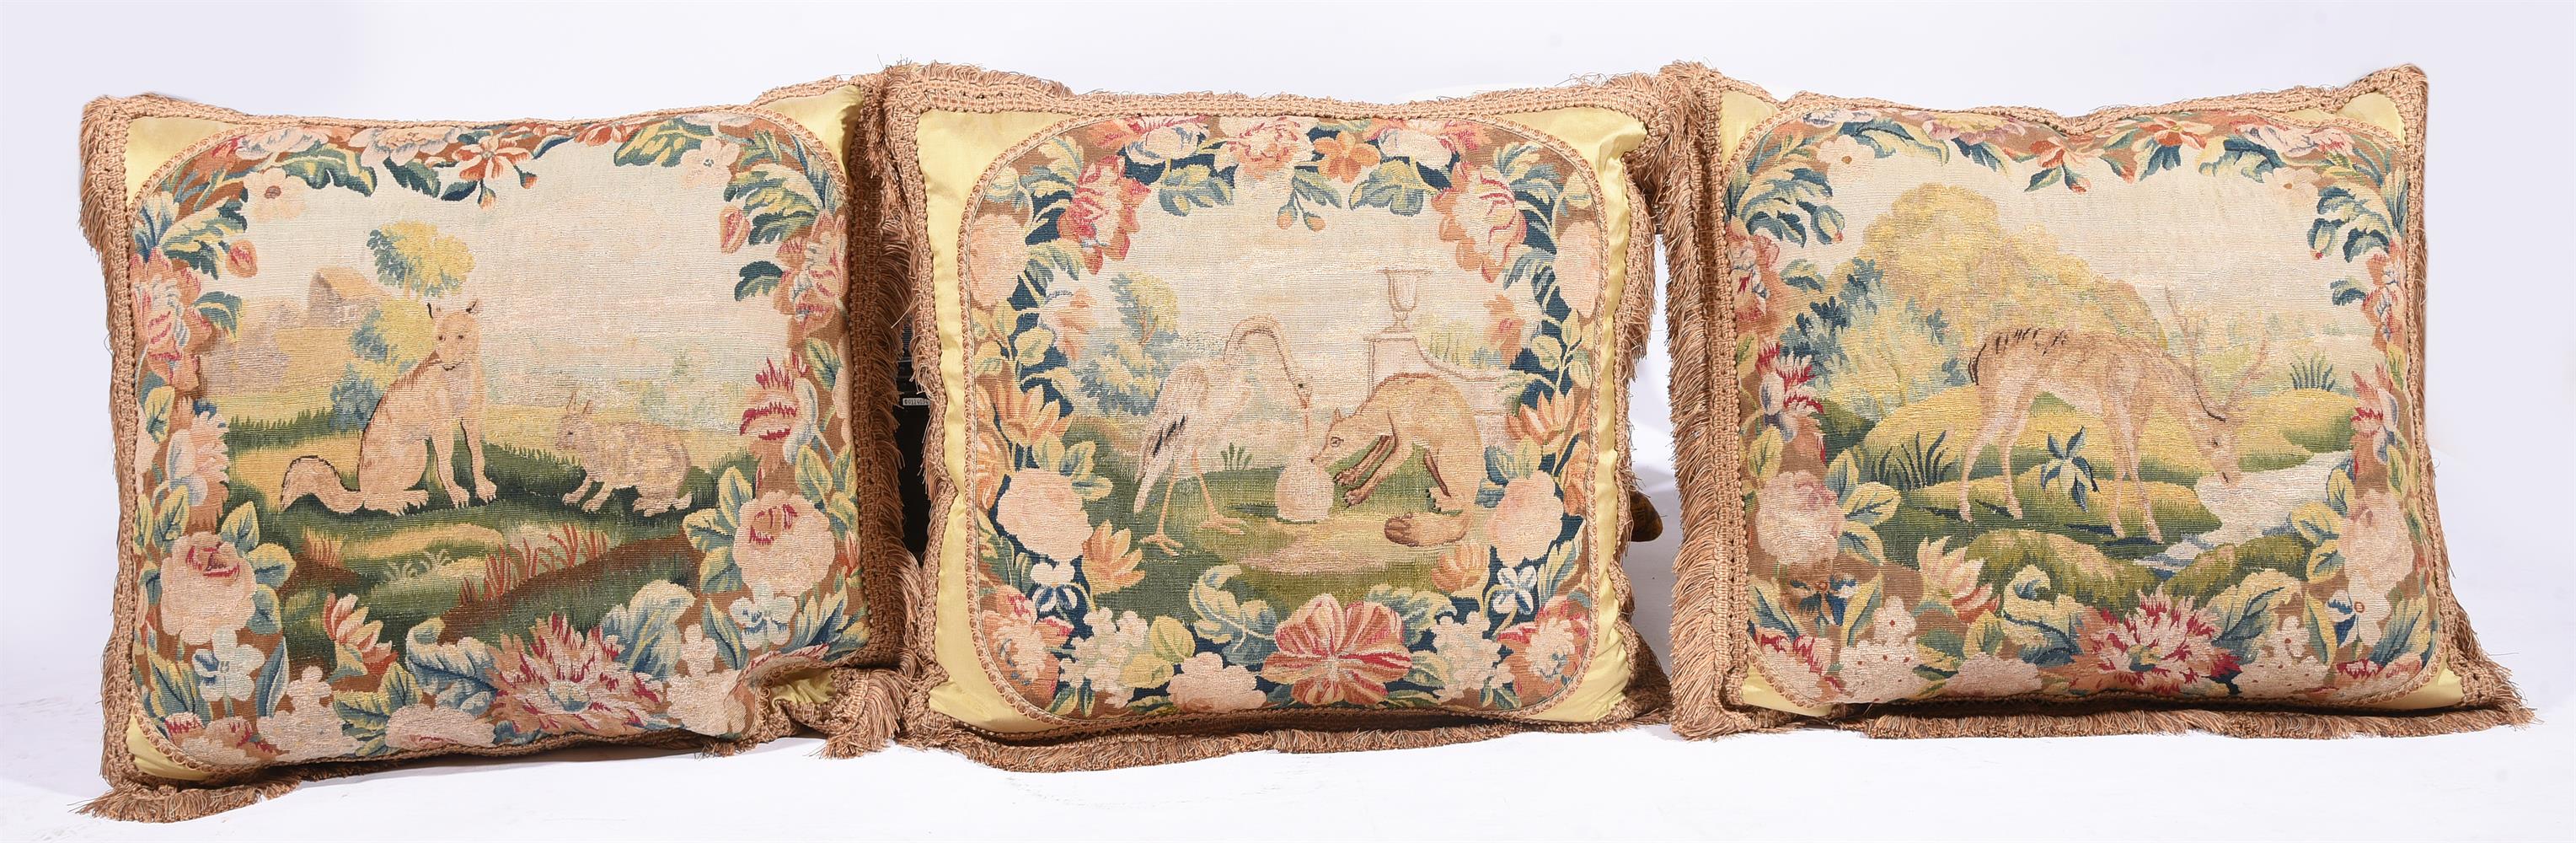 SIX LARGE CUSHIONSINCORPORATING 18TH CENTURY TAPESTRY WITH ANIMALS FROM FABLES AND LATER FABRIC - Image 4 of 4